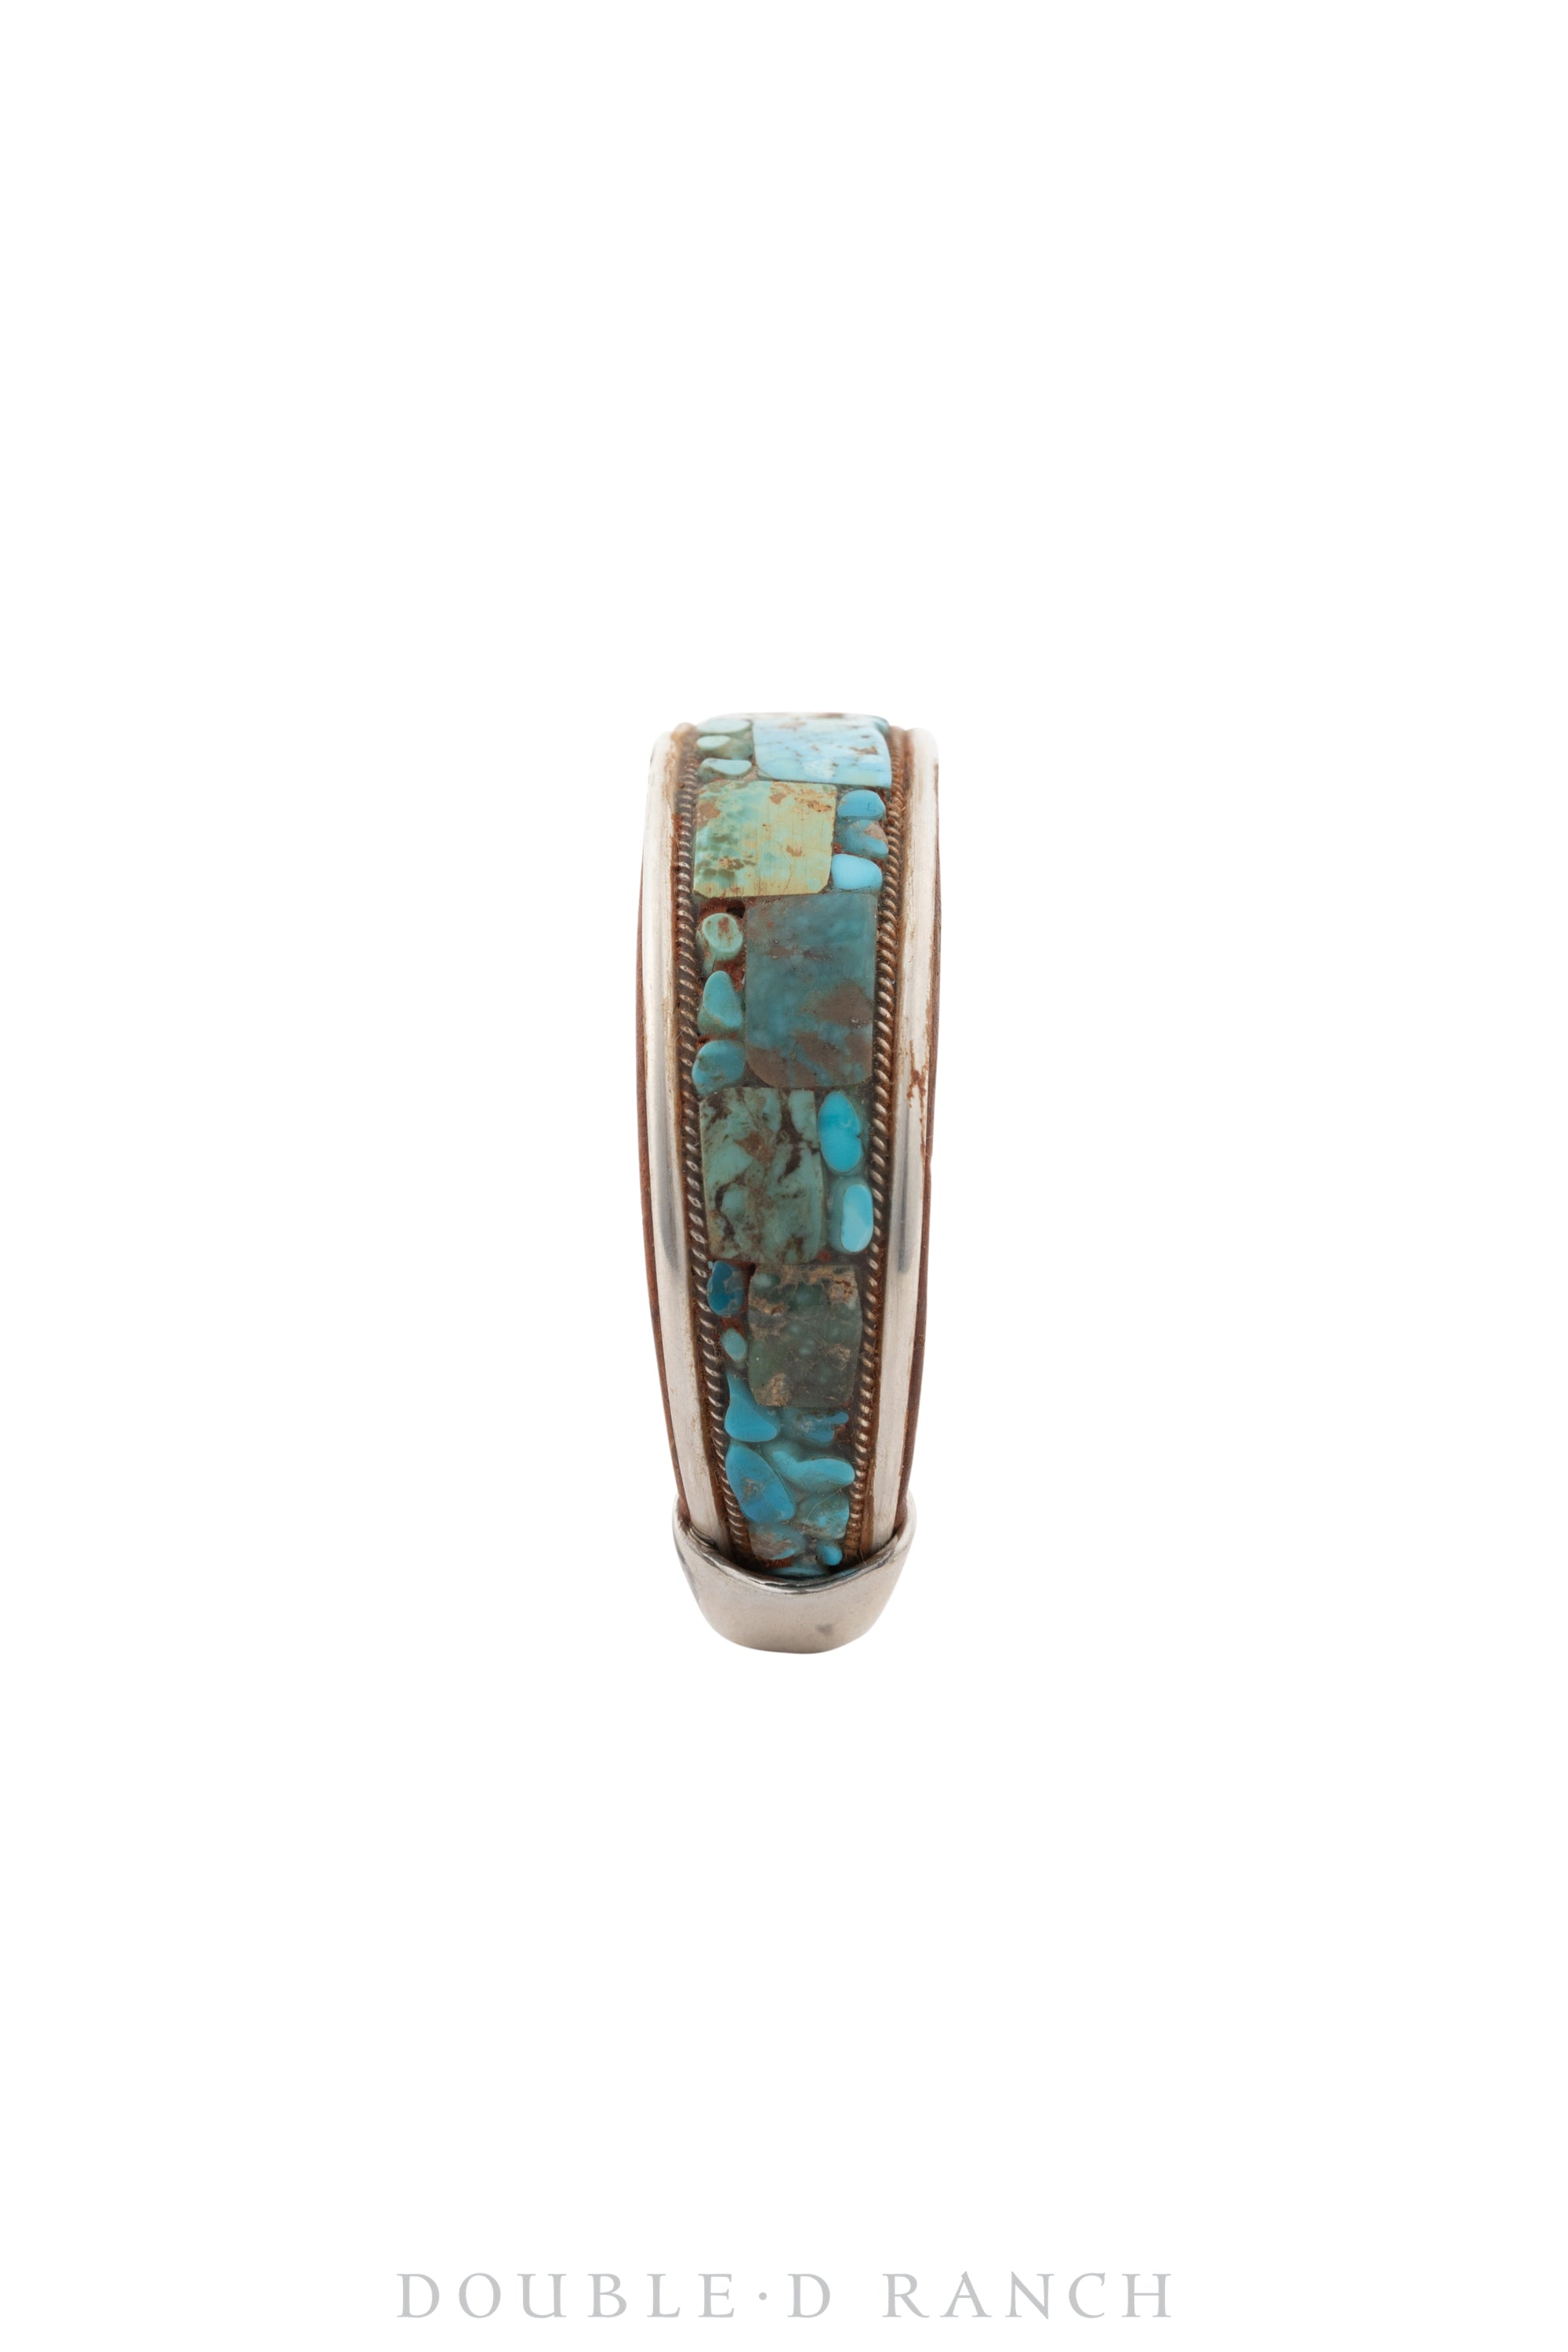 Cuff, Inlay, Turquoise, Leather Lined, Artisan, Charlie Favor, Contemporary, 3661